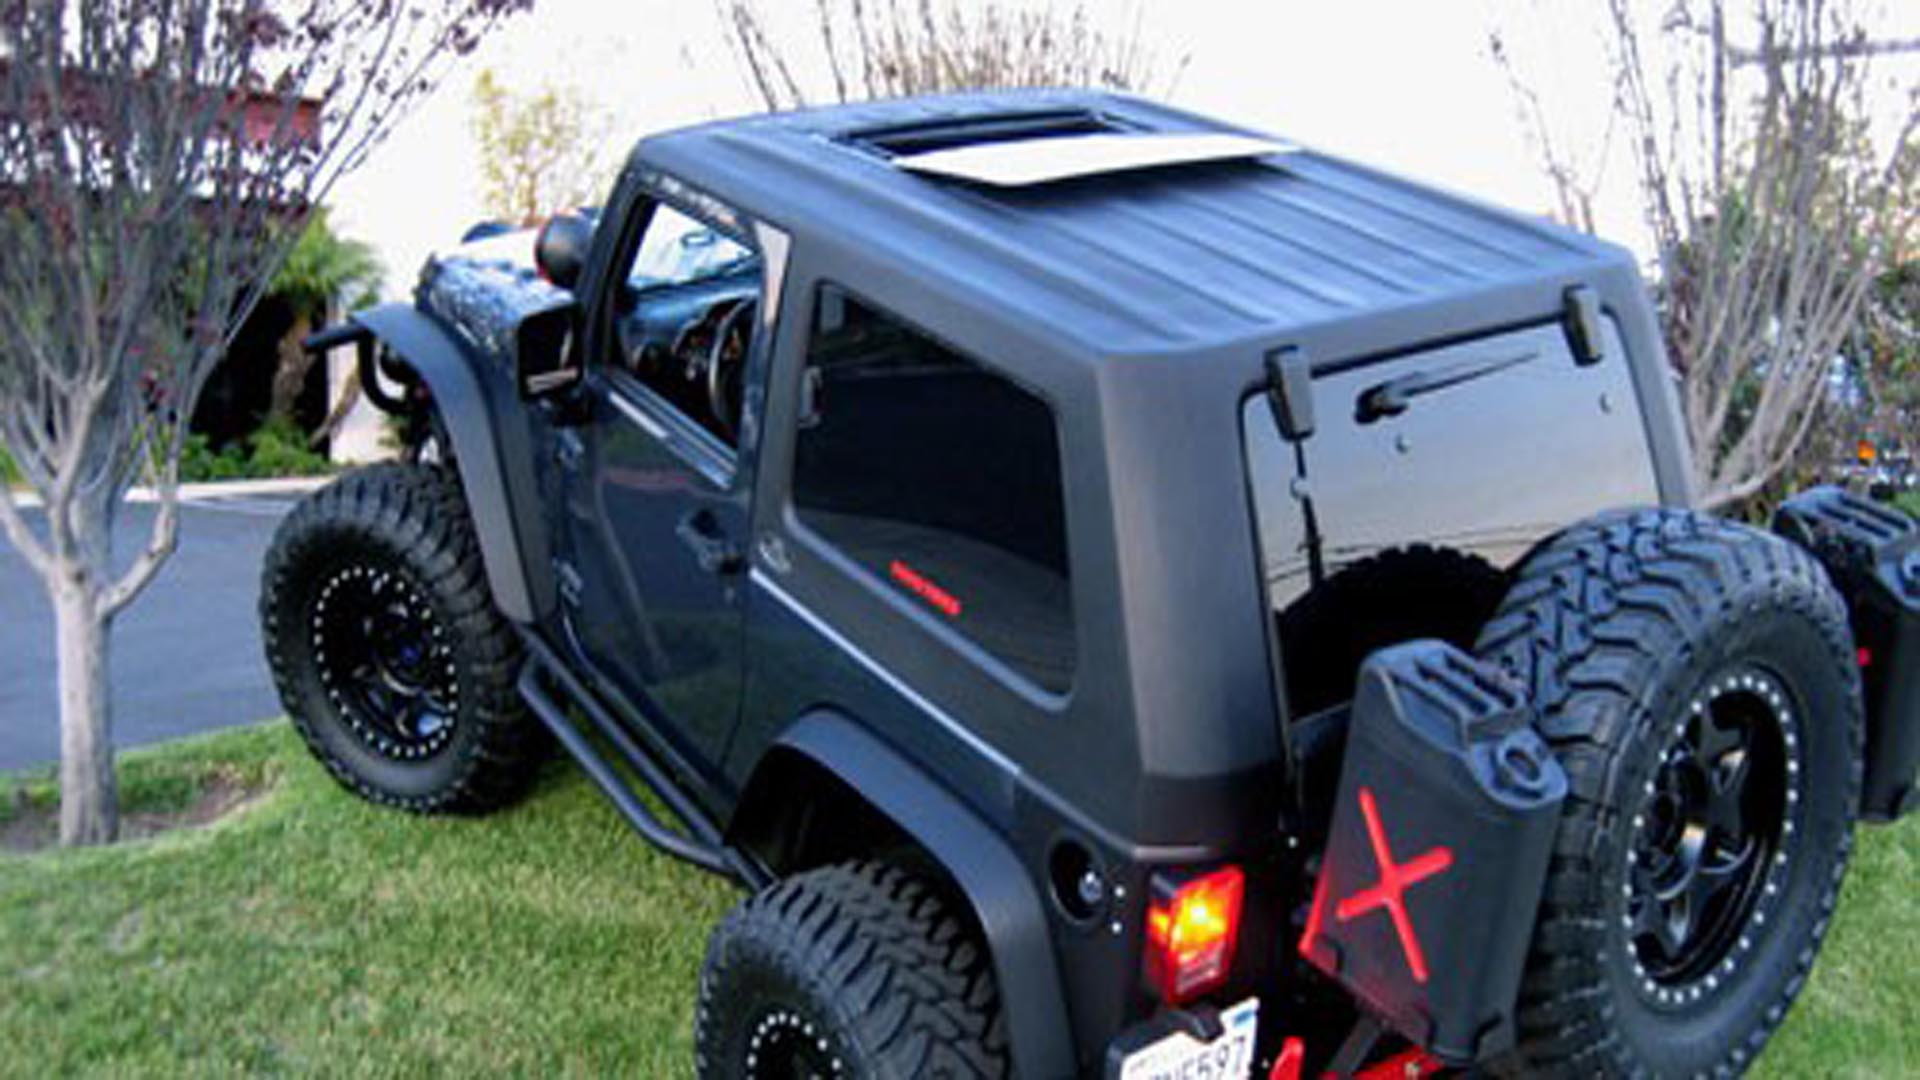 Jeep Wrangler JK: How to Remove Soft Top and Install Hard Top | Jk-forum